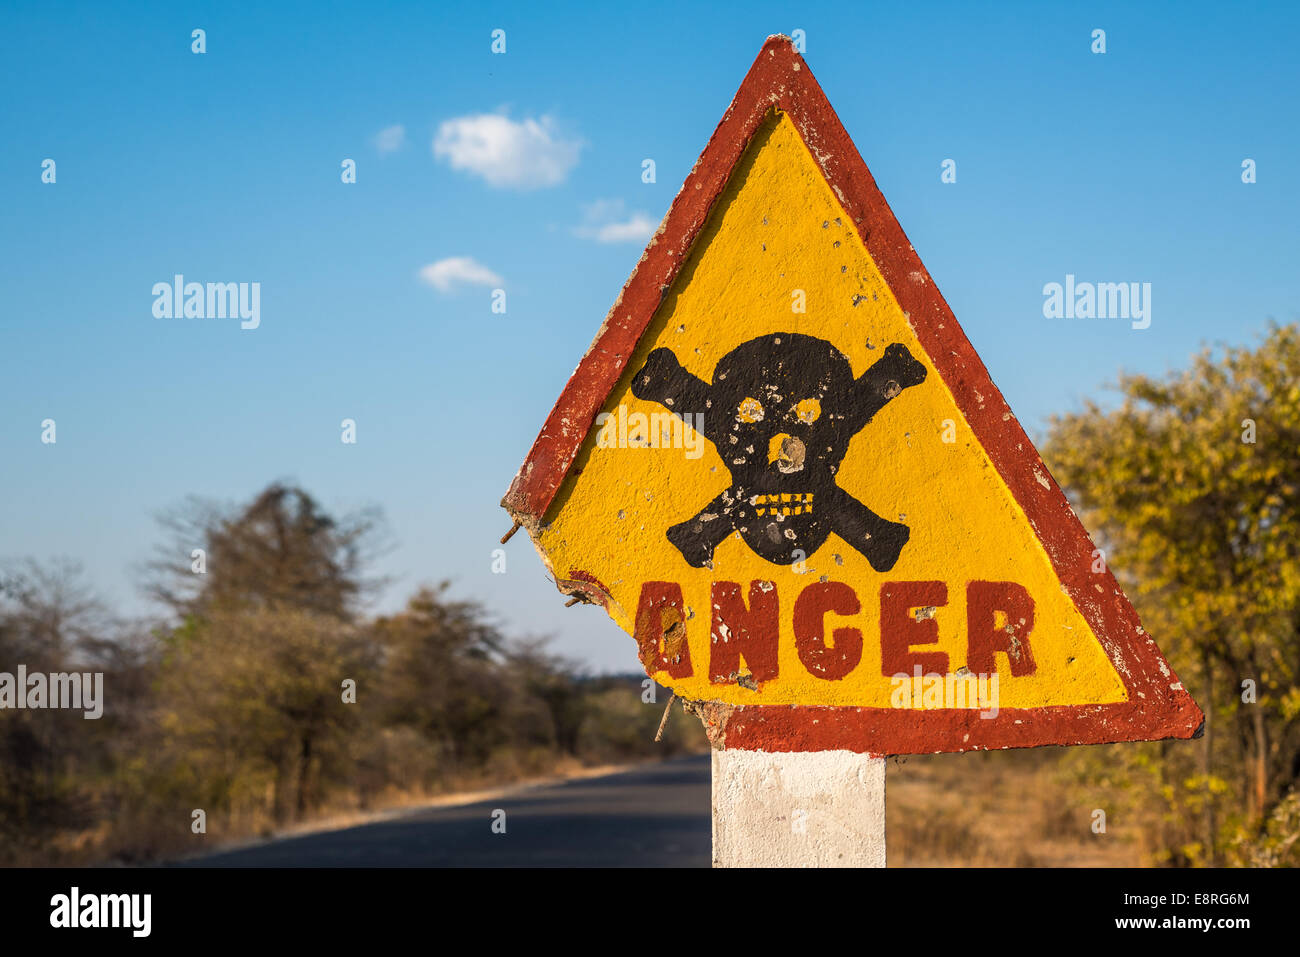 Danger road sign with skull and crossbones Stock Photo